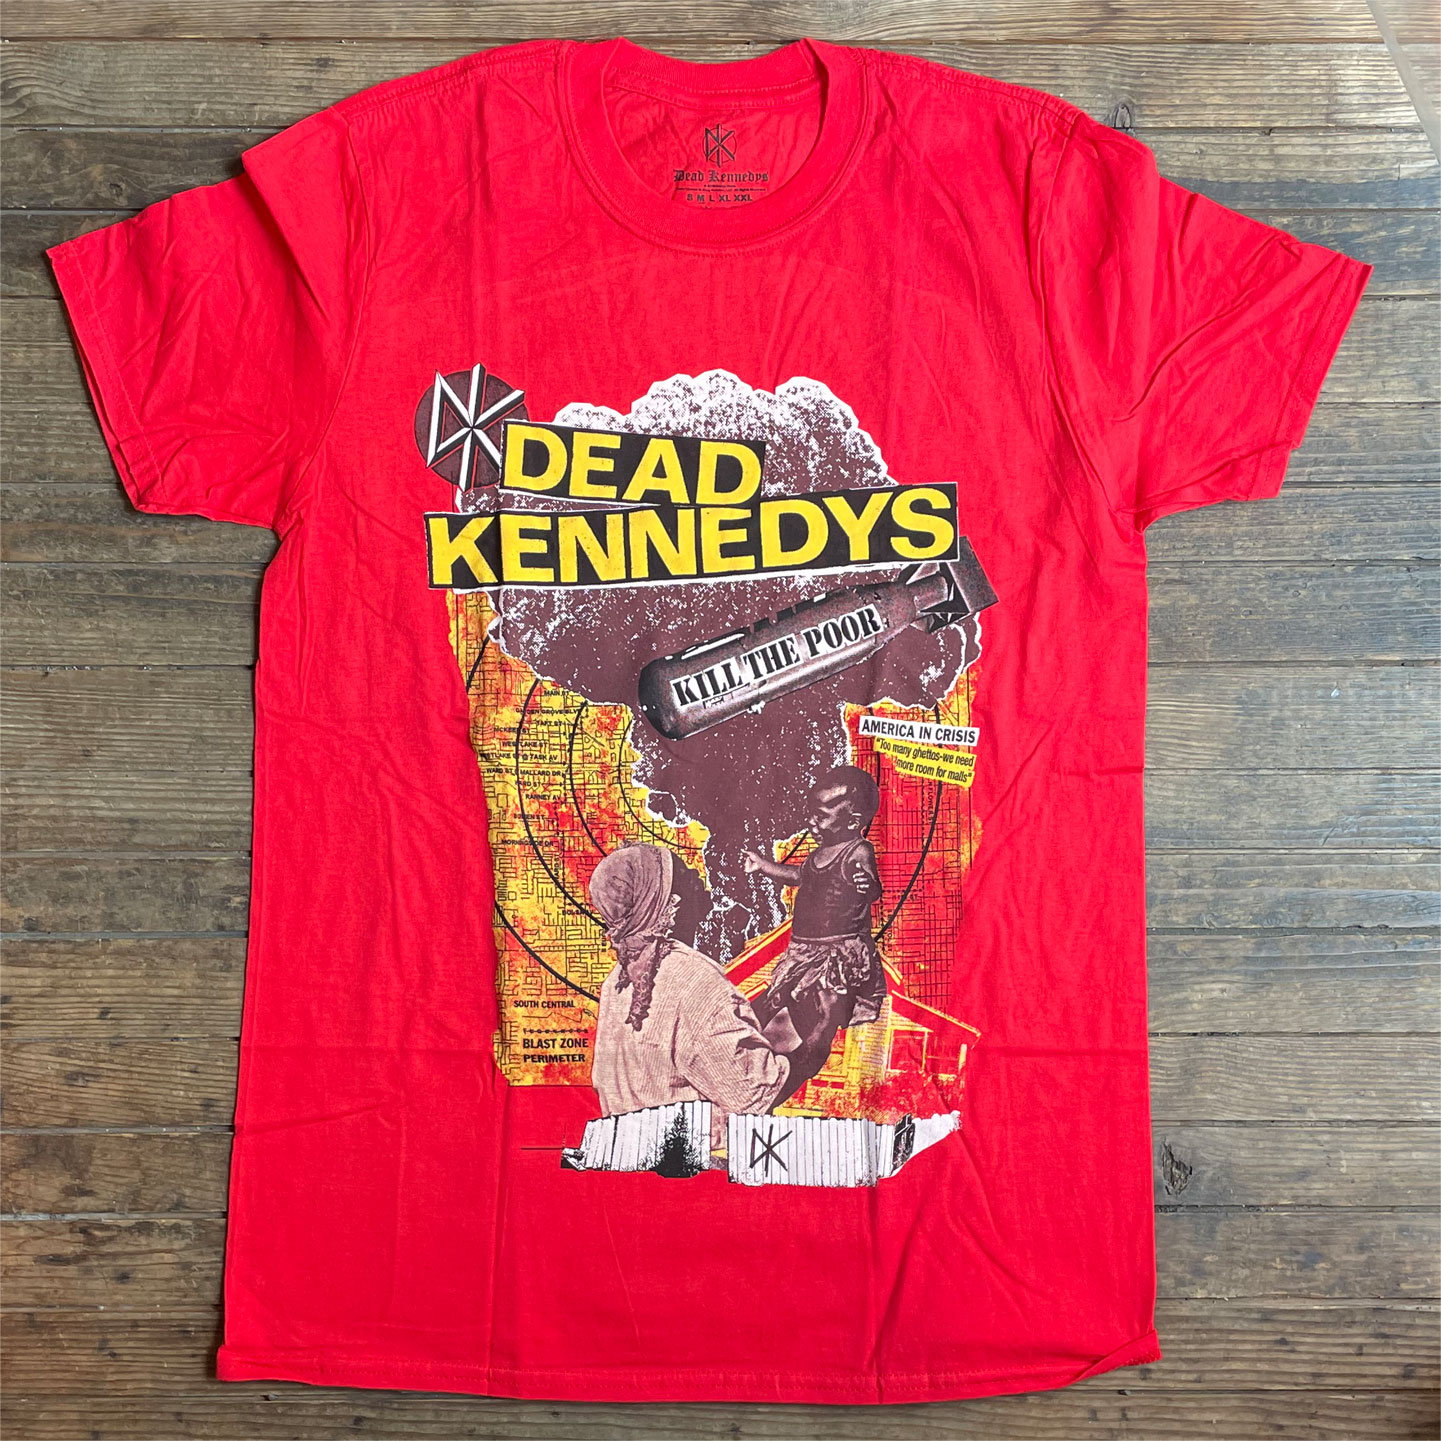 DEAD KENNEDYS Tシャツ KILL THE POOR